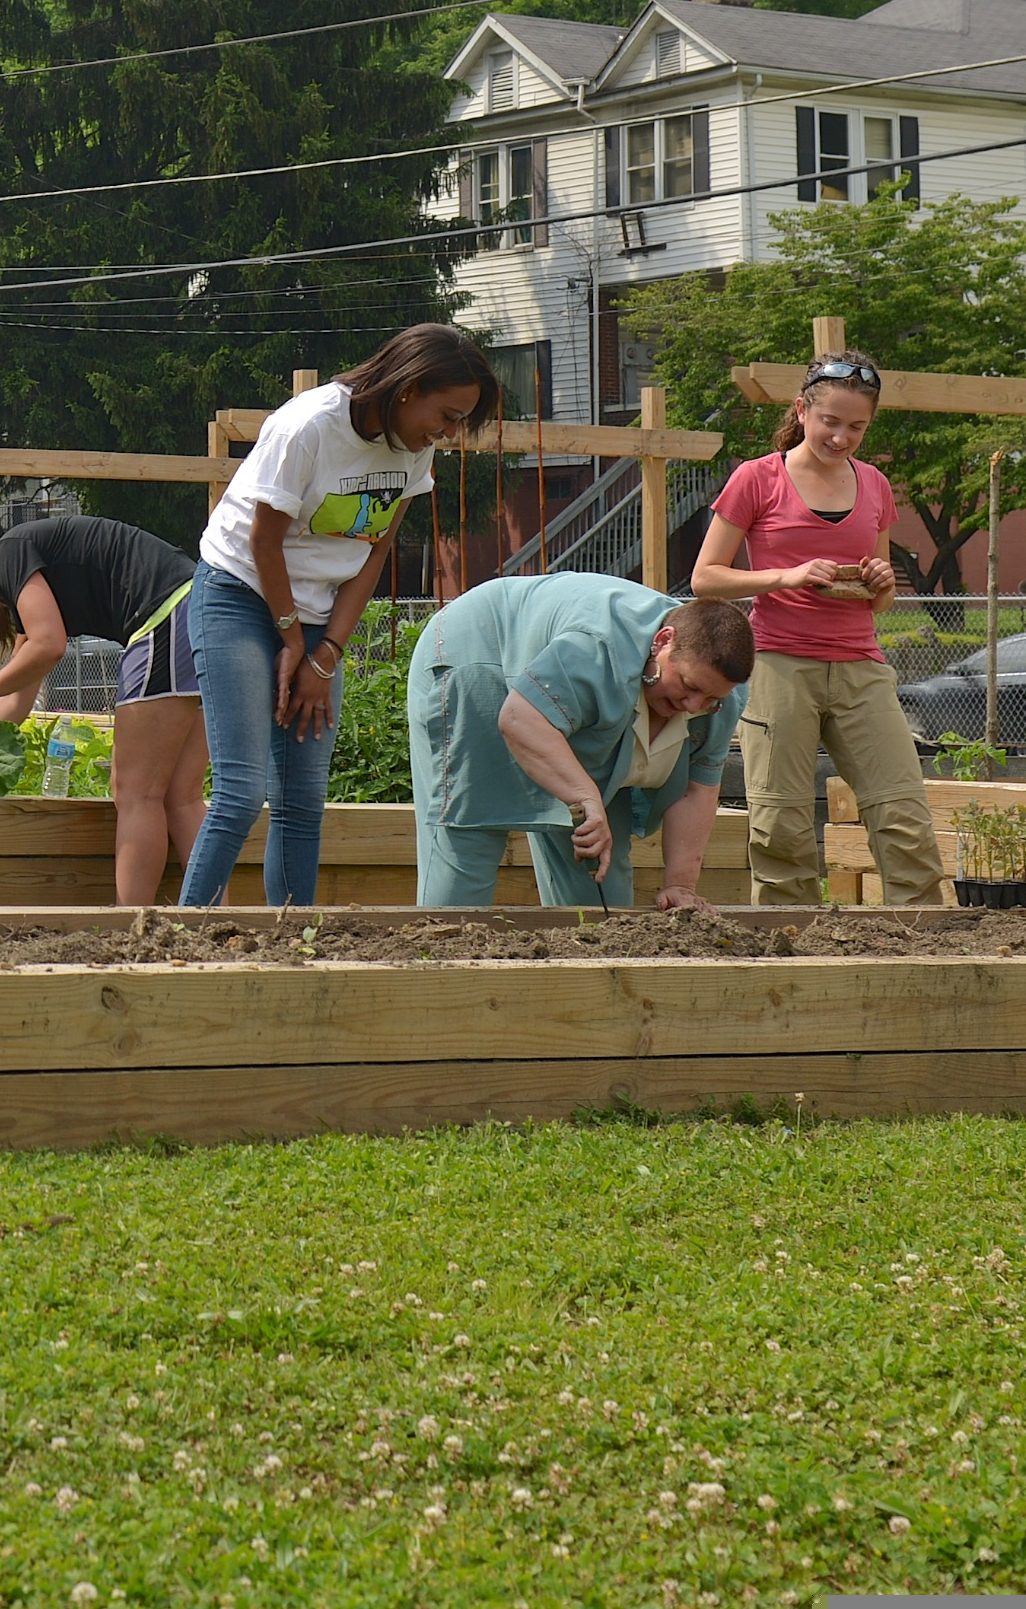 Local residents plant edibles at a community garden.